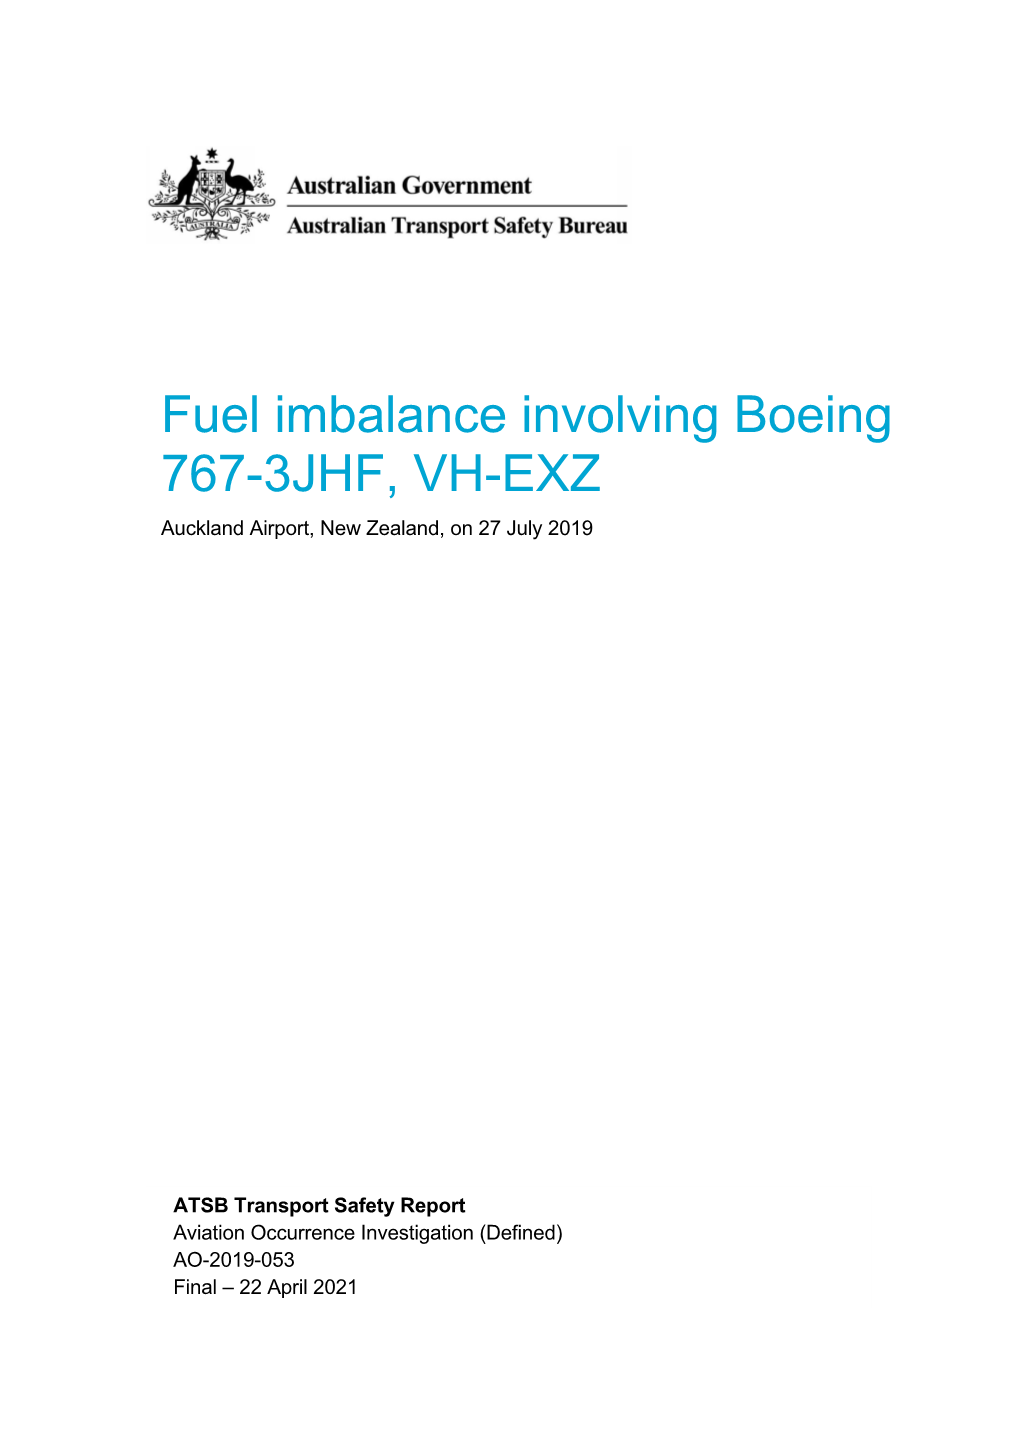 Fuel Imbalance Involving Boeing 767-3JHF, VH-EXZ Auckland Airport, New Zealand, on 27 July 2019